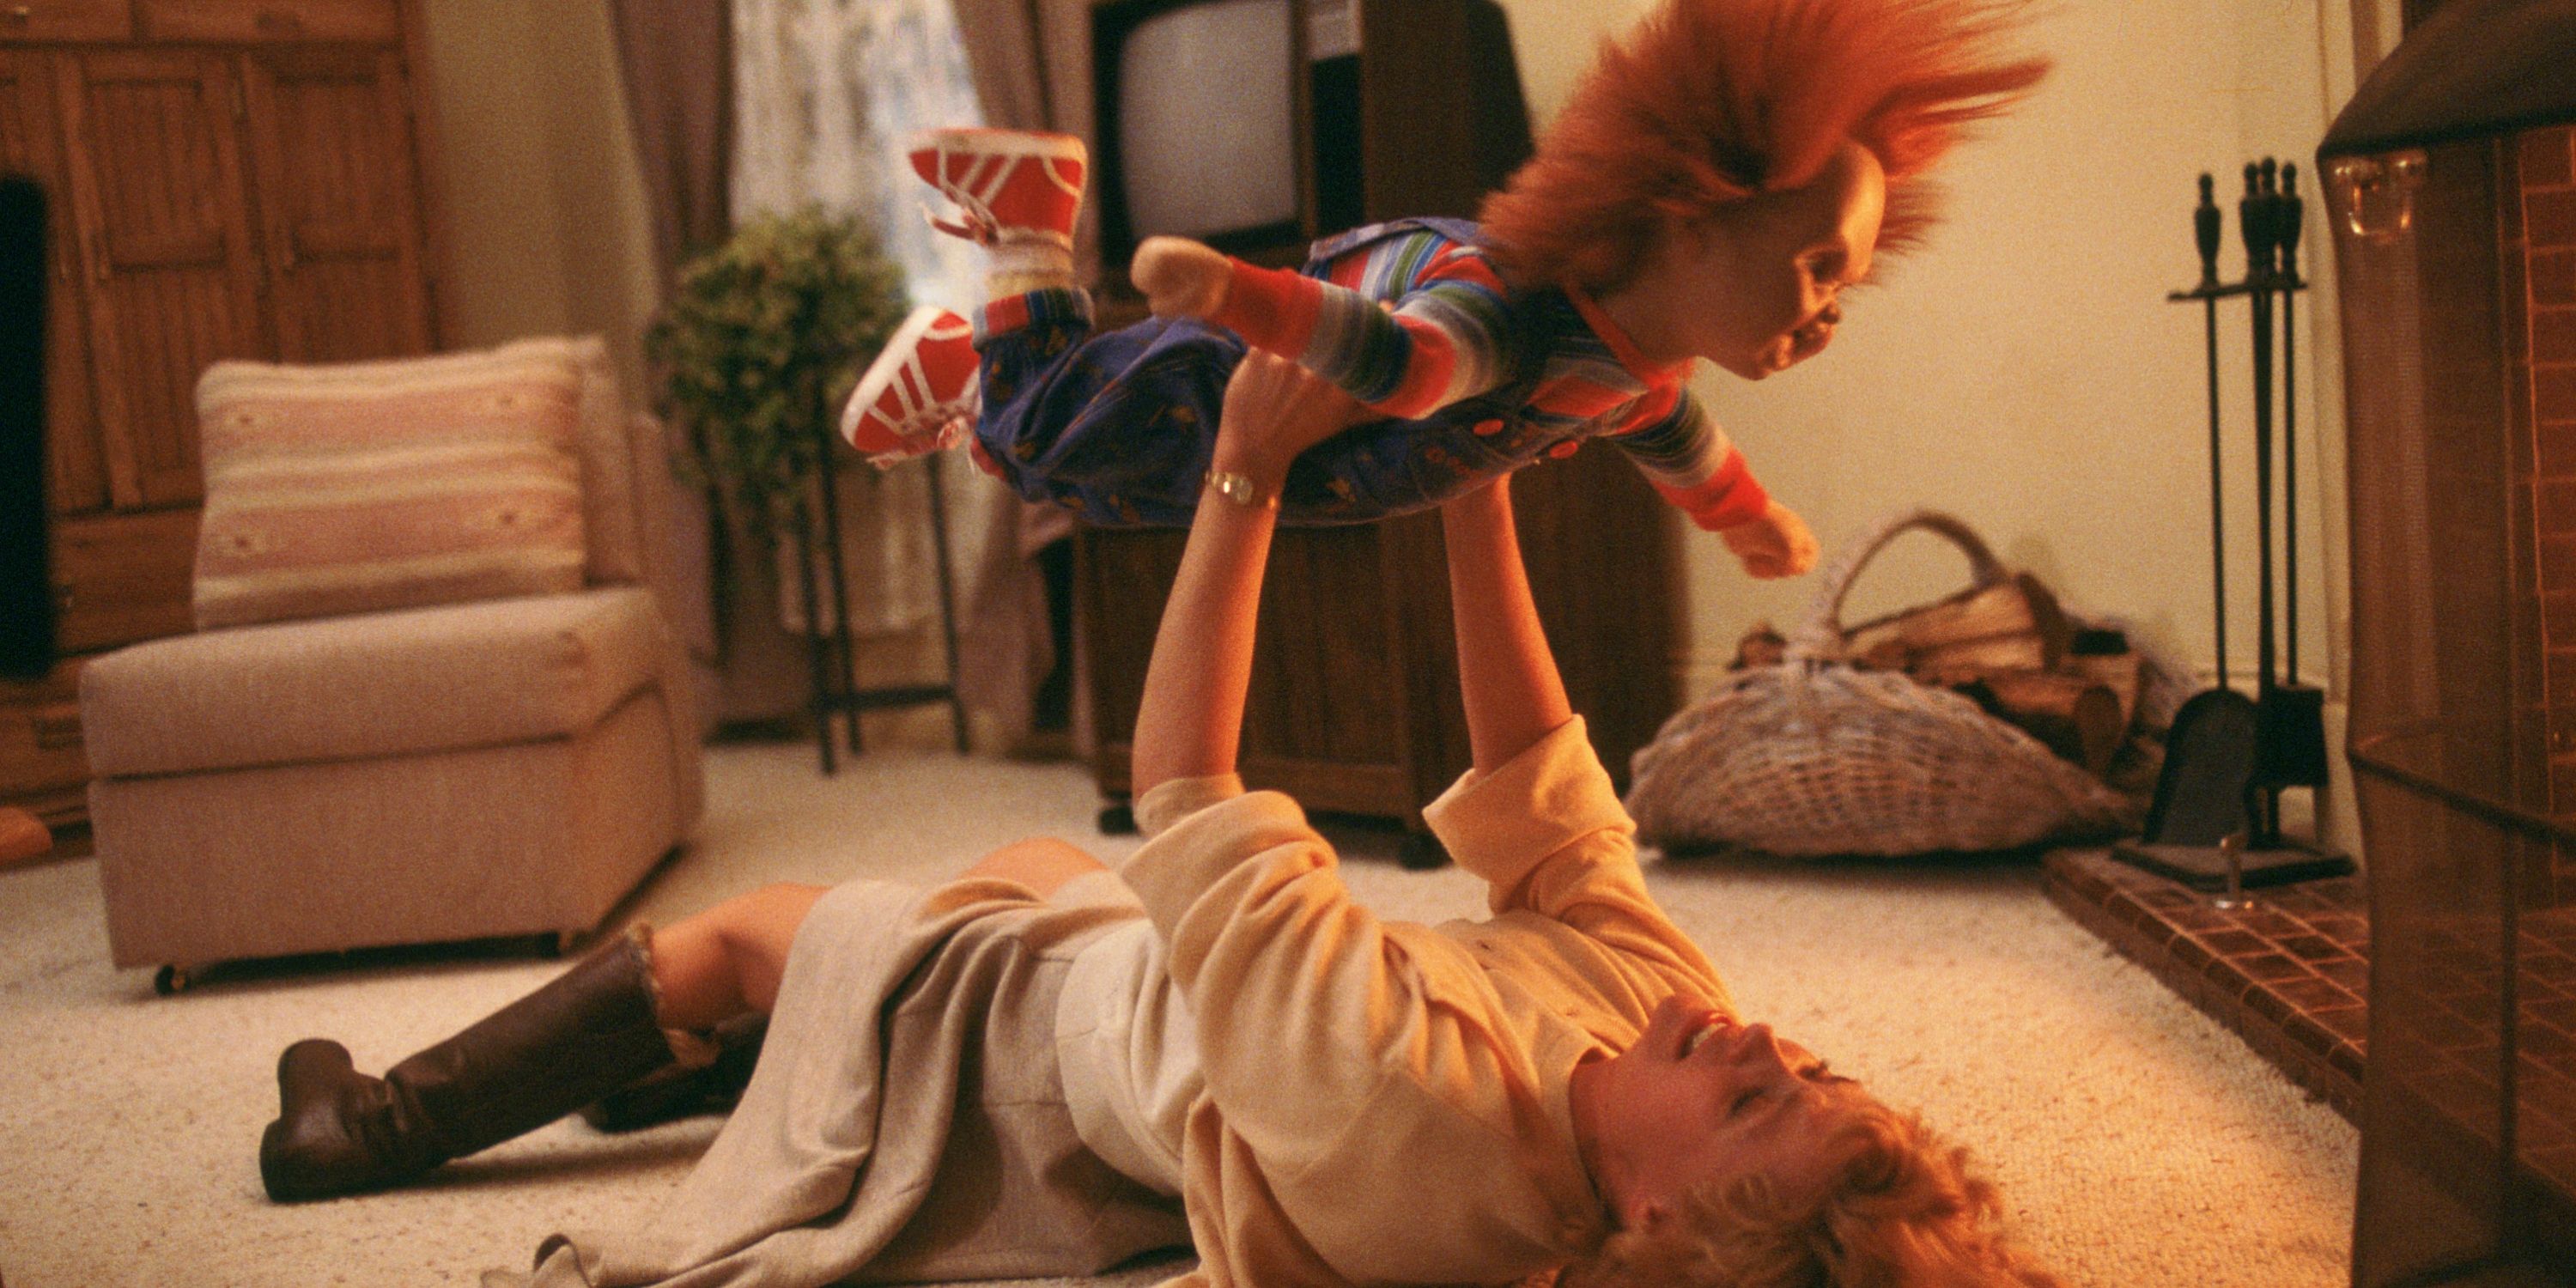 How ‘Child’s Play’ Producer Turned a Fear of Dolls Into a Killer Franchise